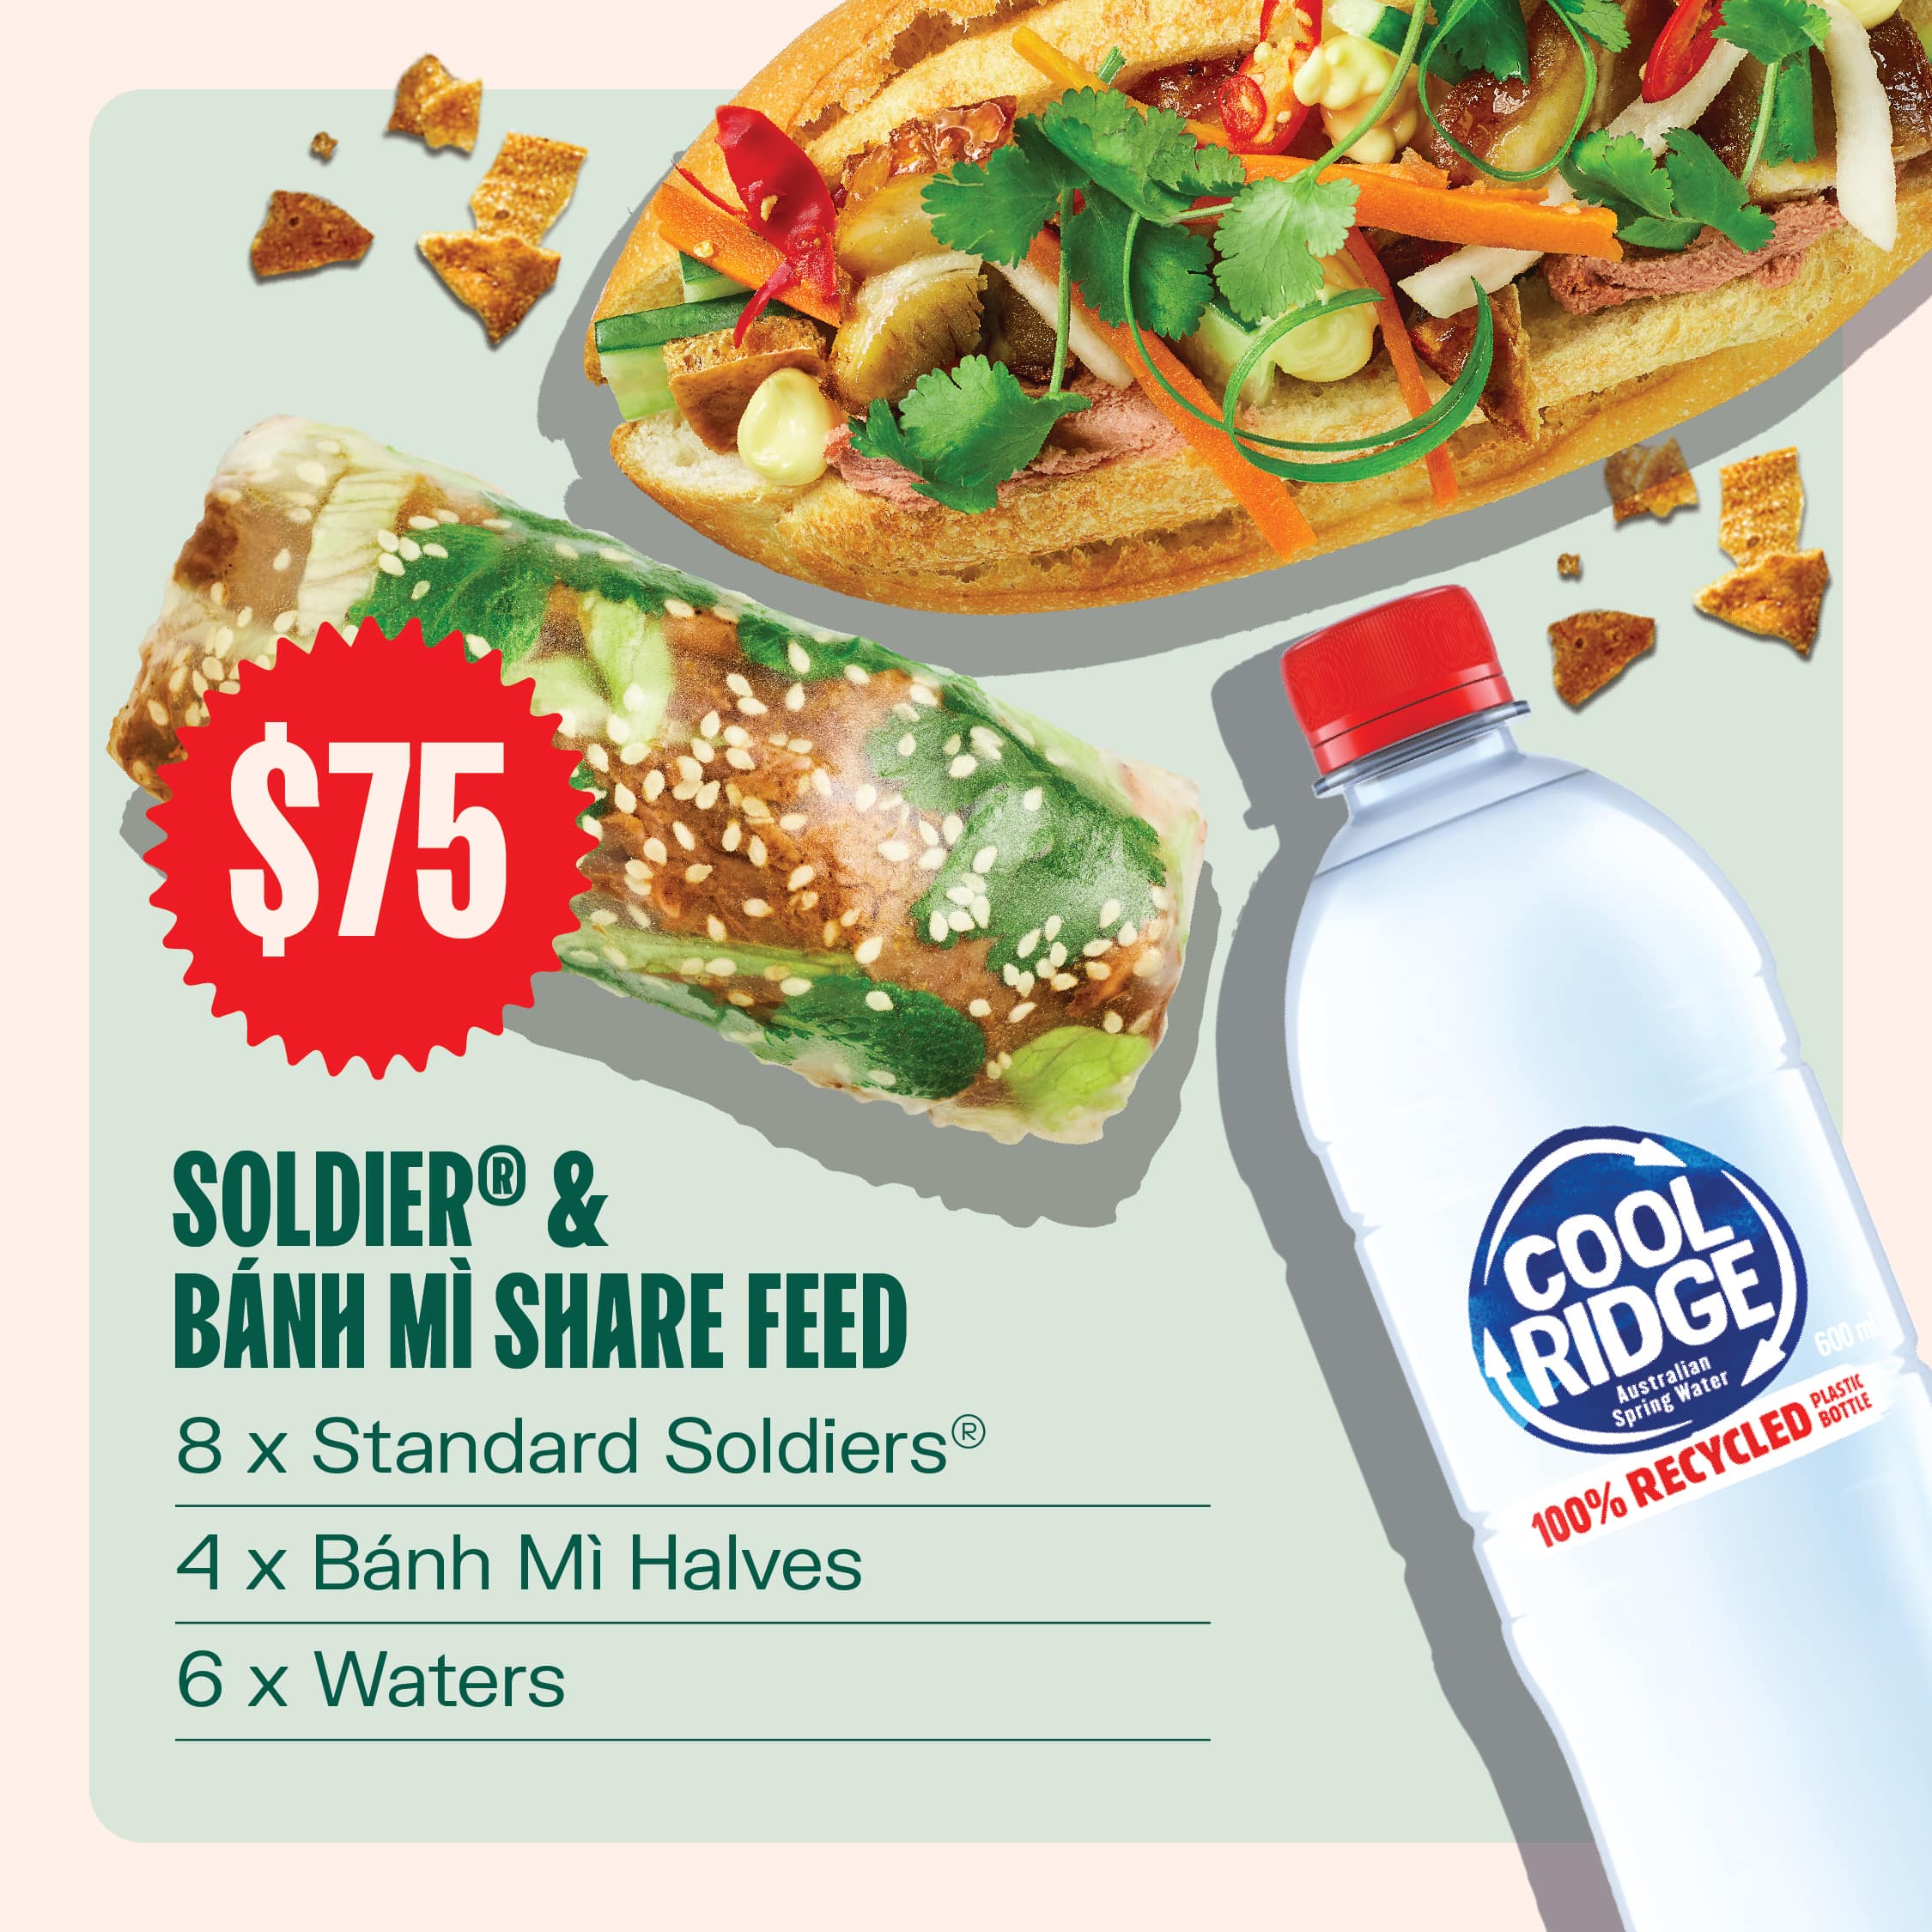 Soldiers & Banh Mi Feed